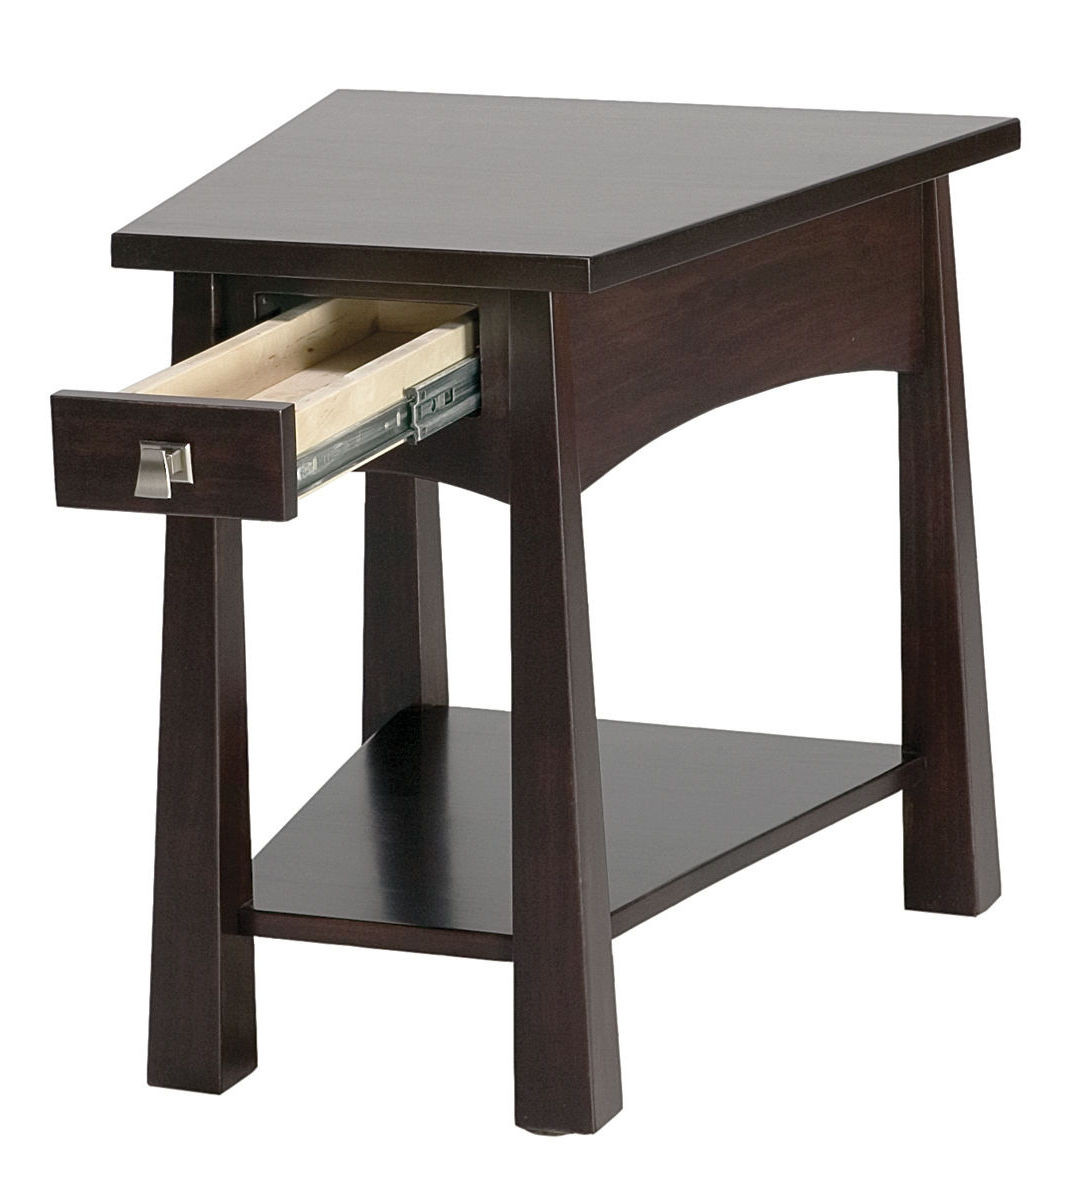 Side Tables Living Room
 Living Room End Tables Furniture for Small Living Room